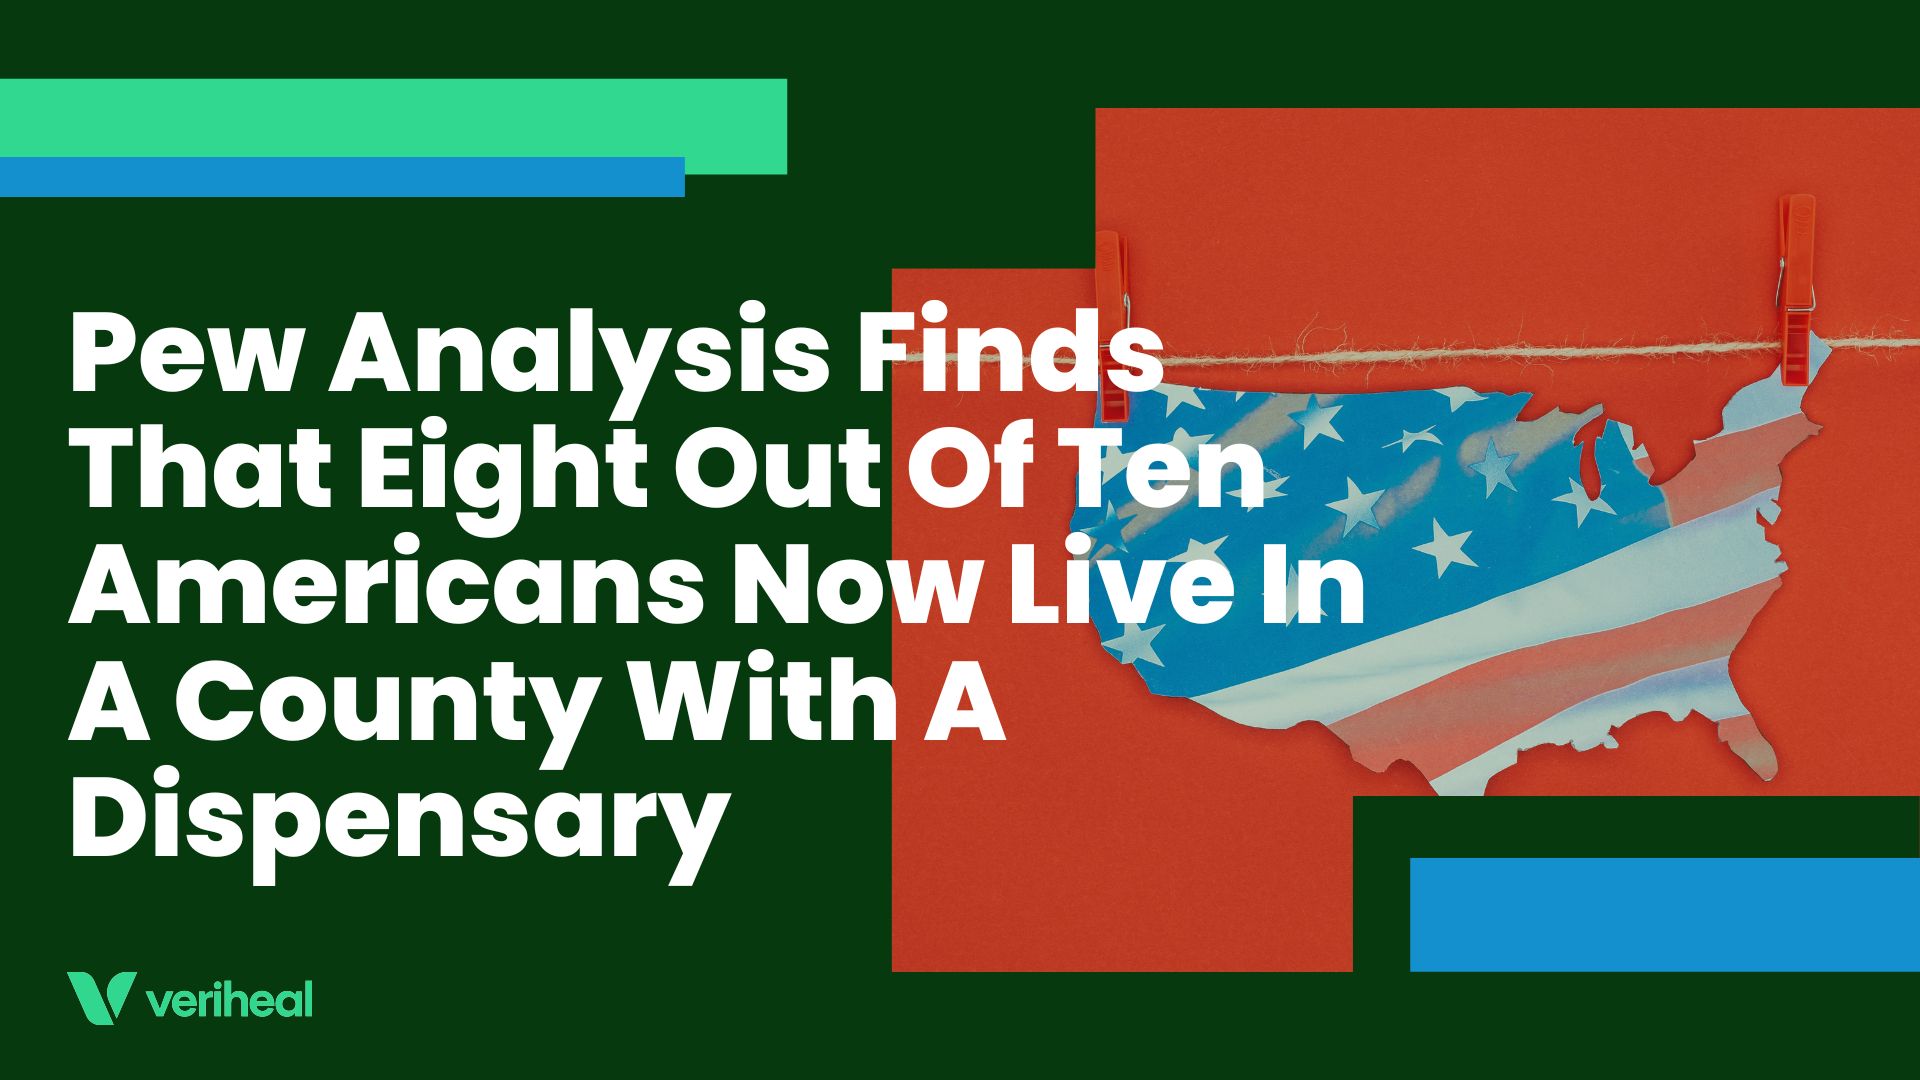 Pew Analysis Finds That Eight Out Of Ten Americans Now Live In A County With A Dispensary